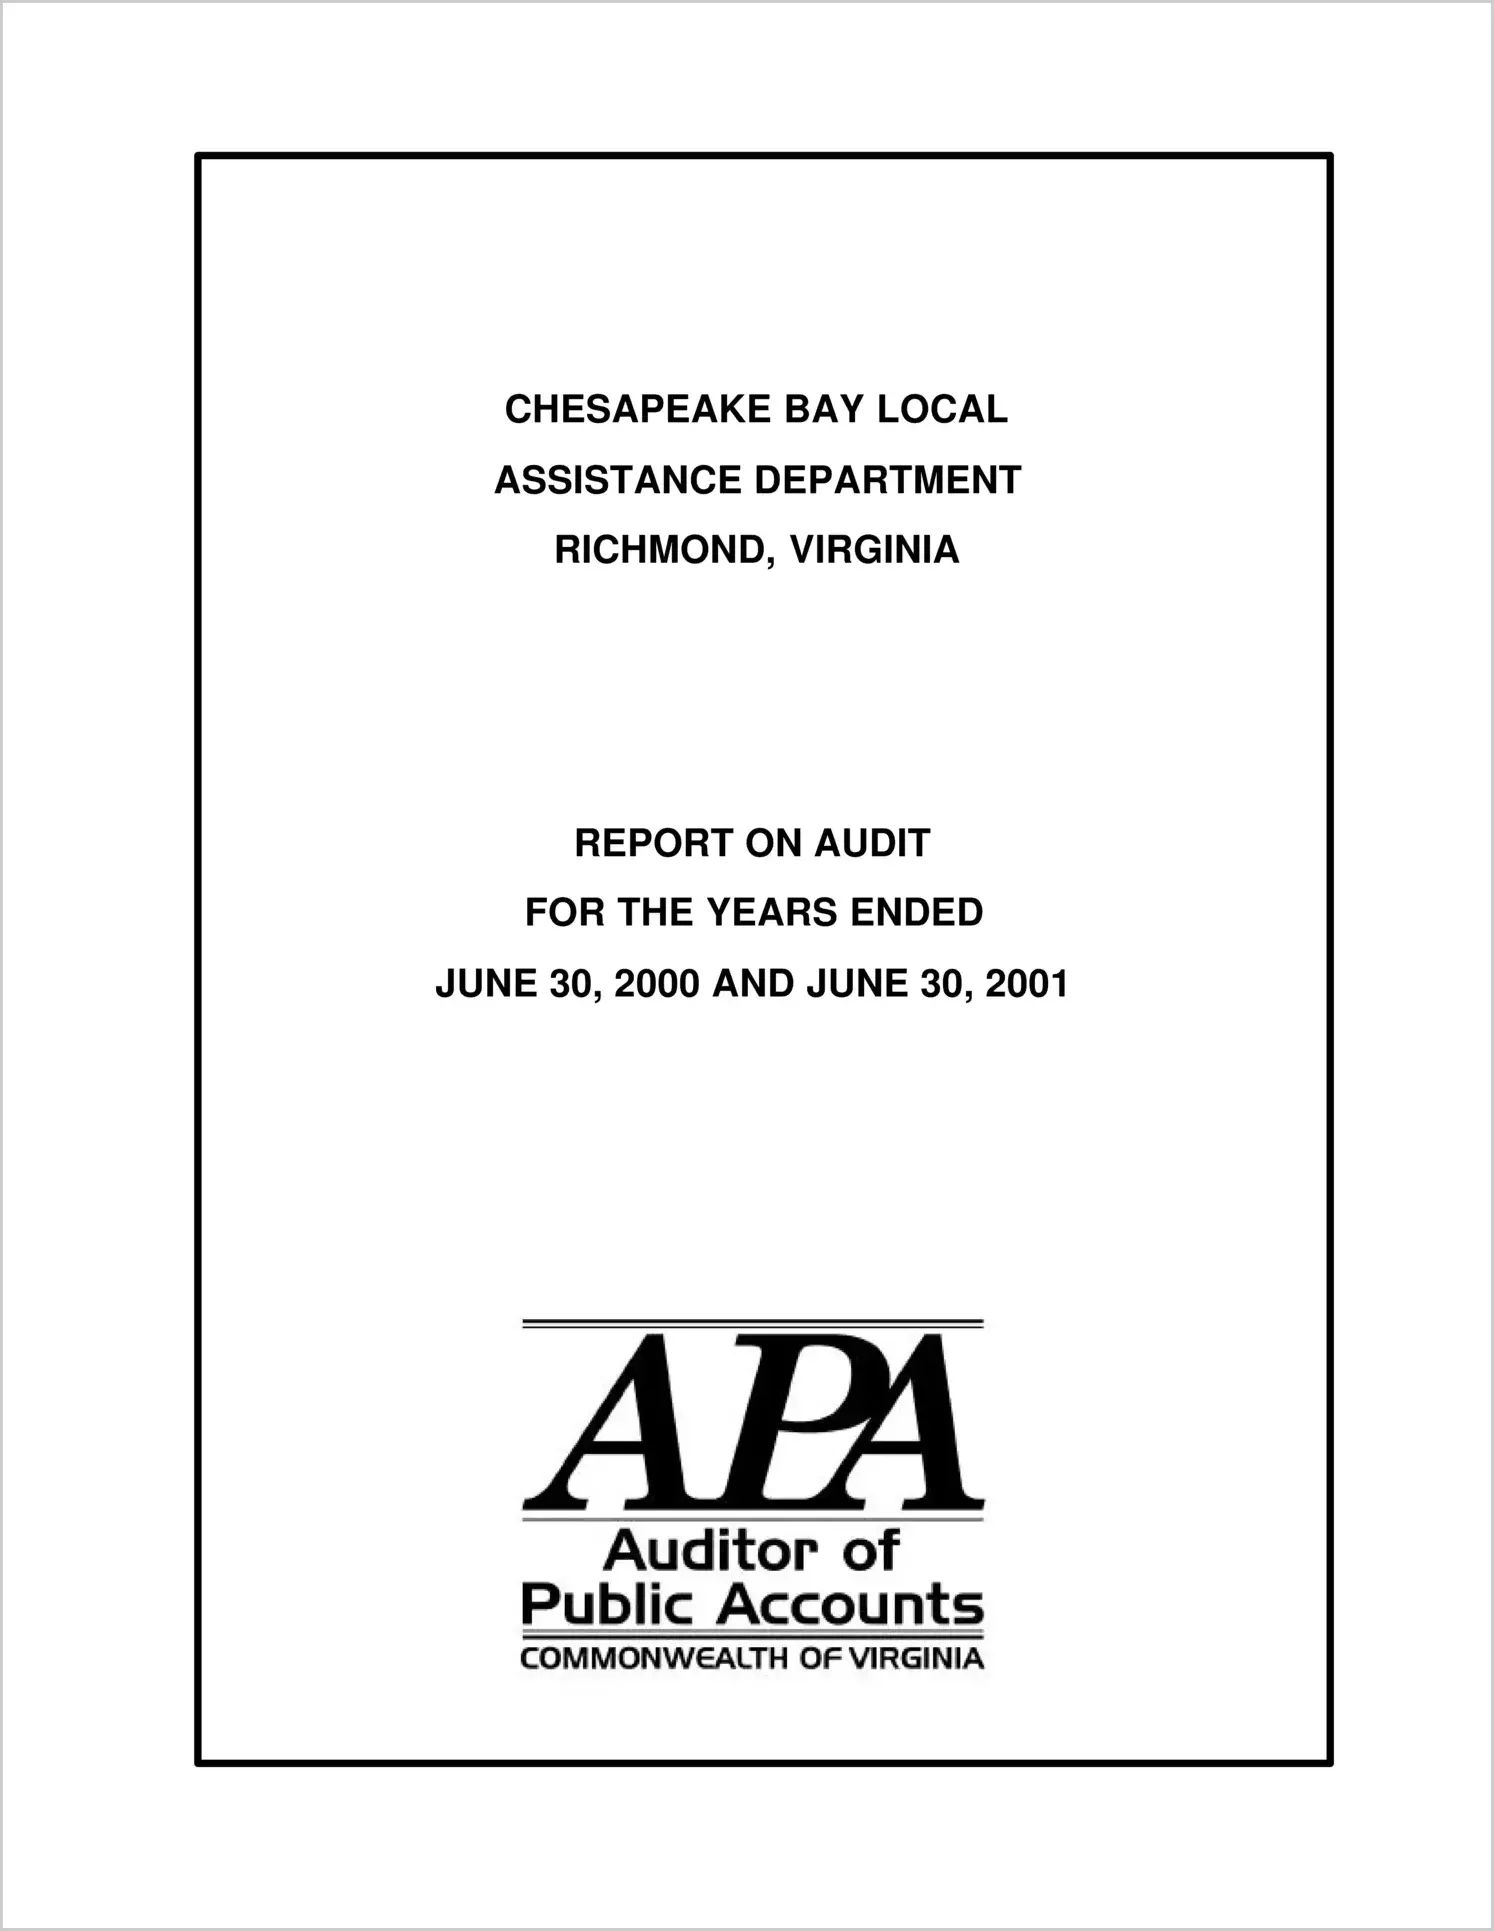 Chesapeake Bay Local Assistance Department for the year ended June 30, 2000 and June 30, 2001